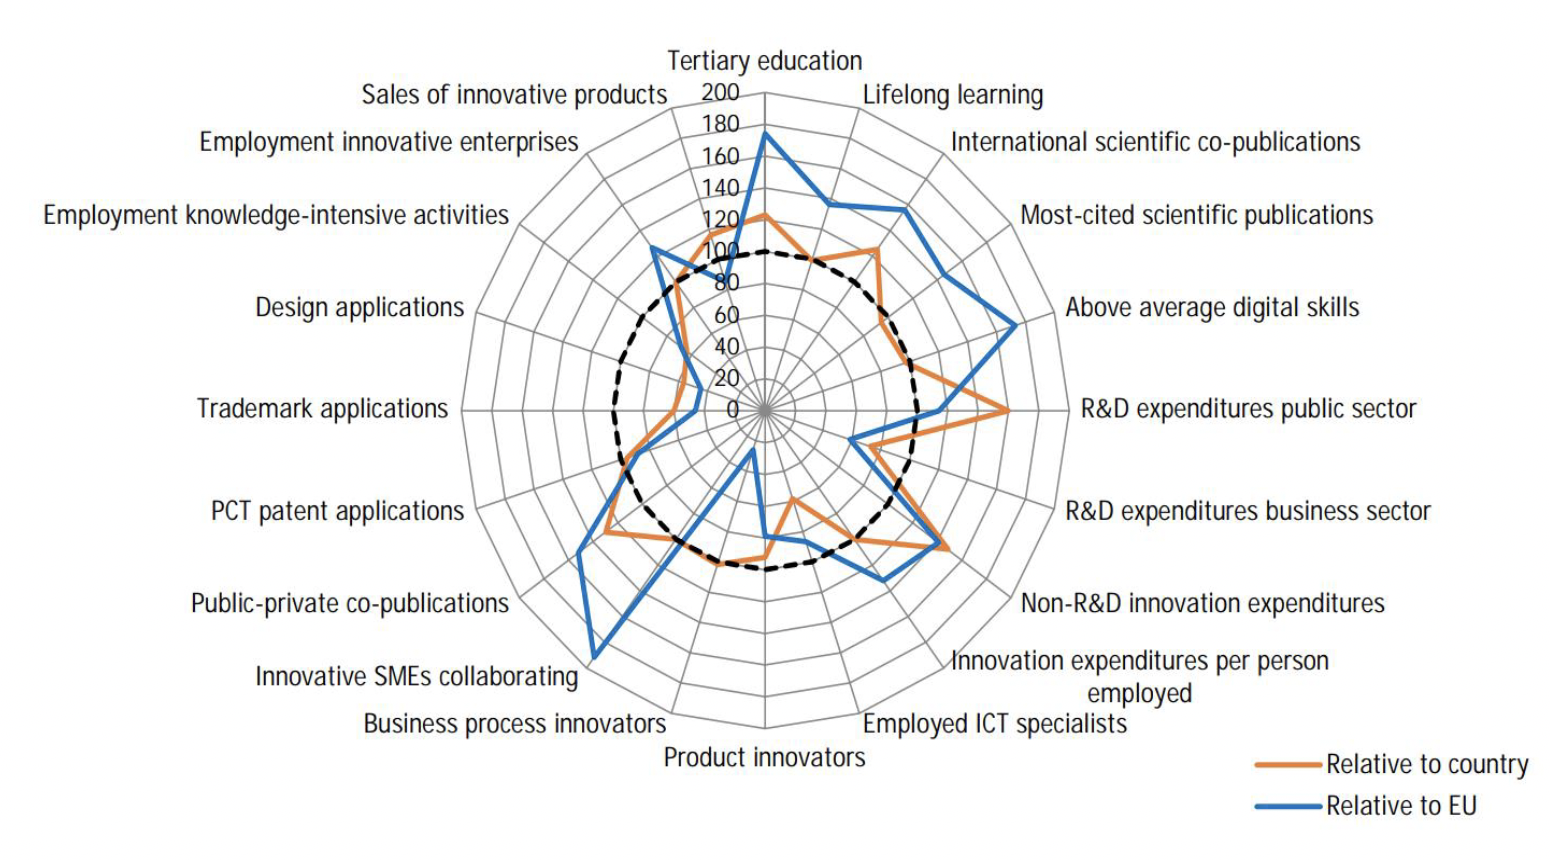 figure 10 shows the relative strenghts of Scotland's innovation system on the radar chart against the UK and the EU. The UK and EU generally outperform Scotland however in some areas Scotland outperforms one or both of these geographies on a handful of metrics.